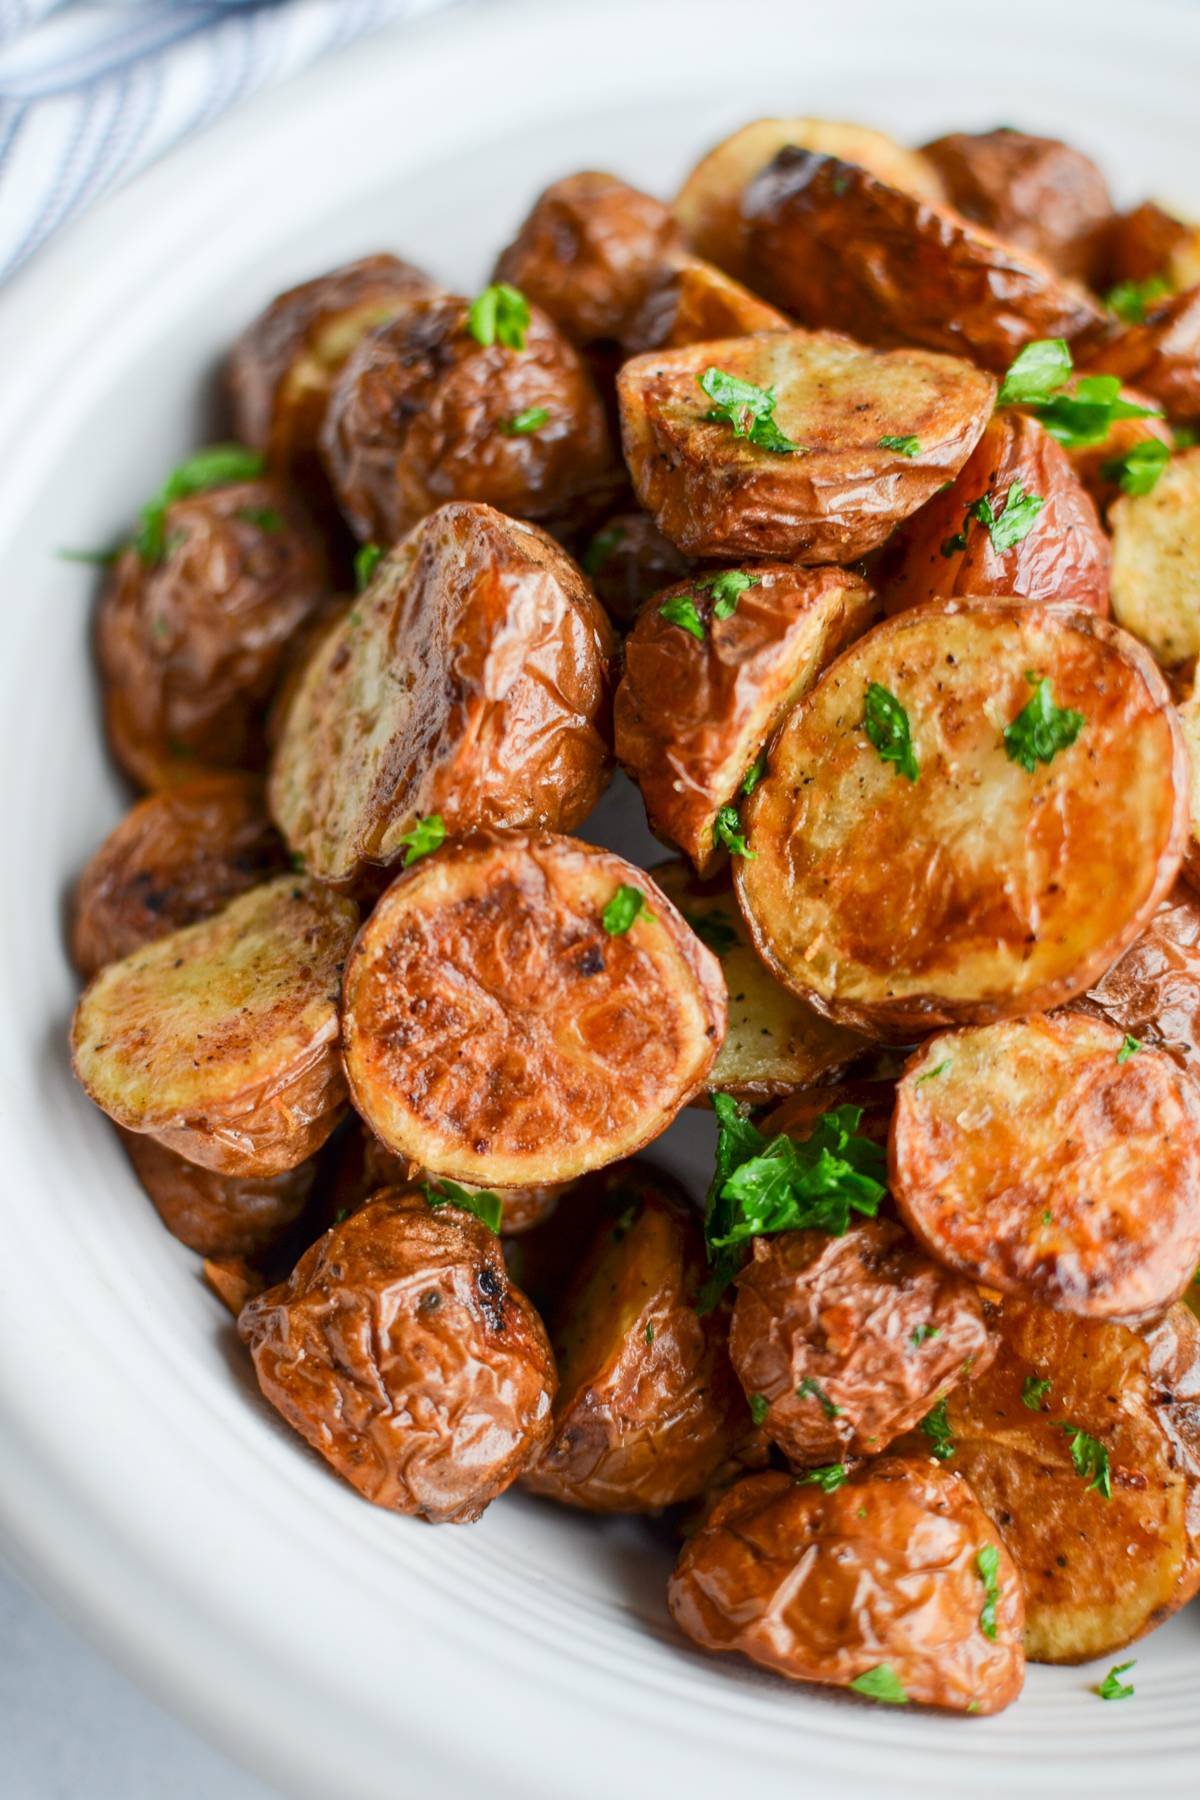 A bowl of roasted baby potatoes.